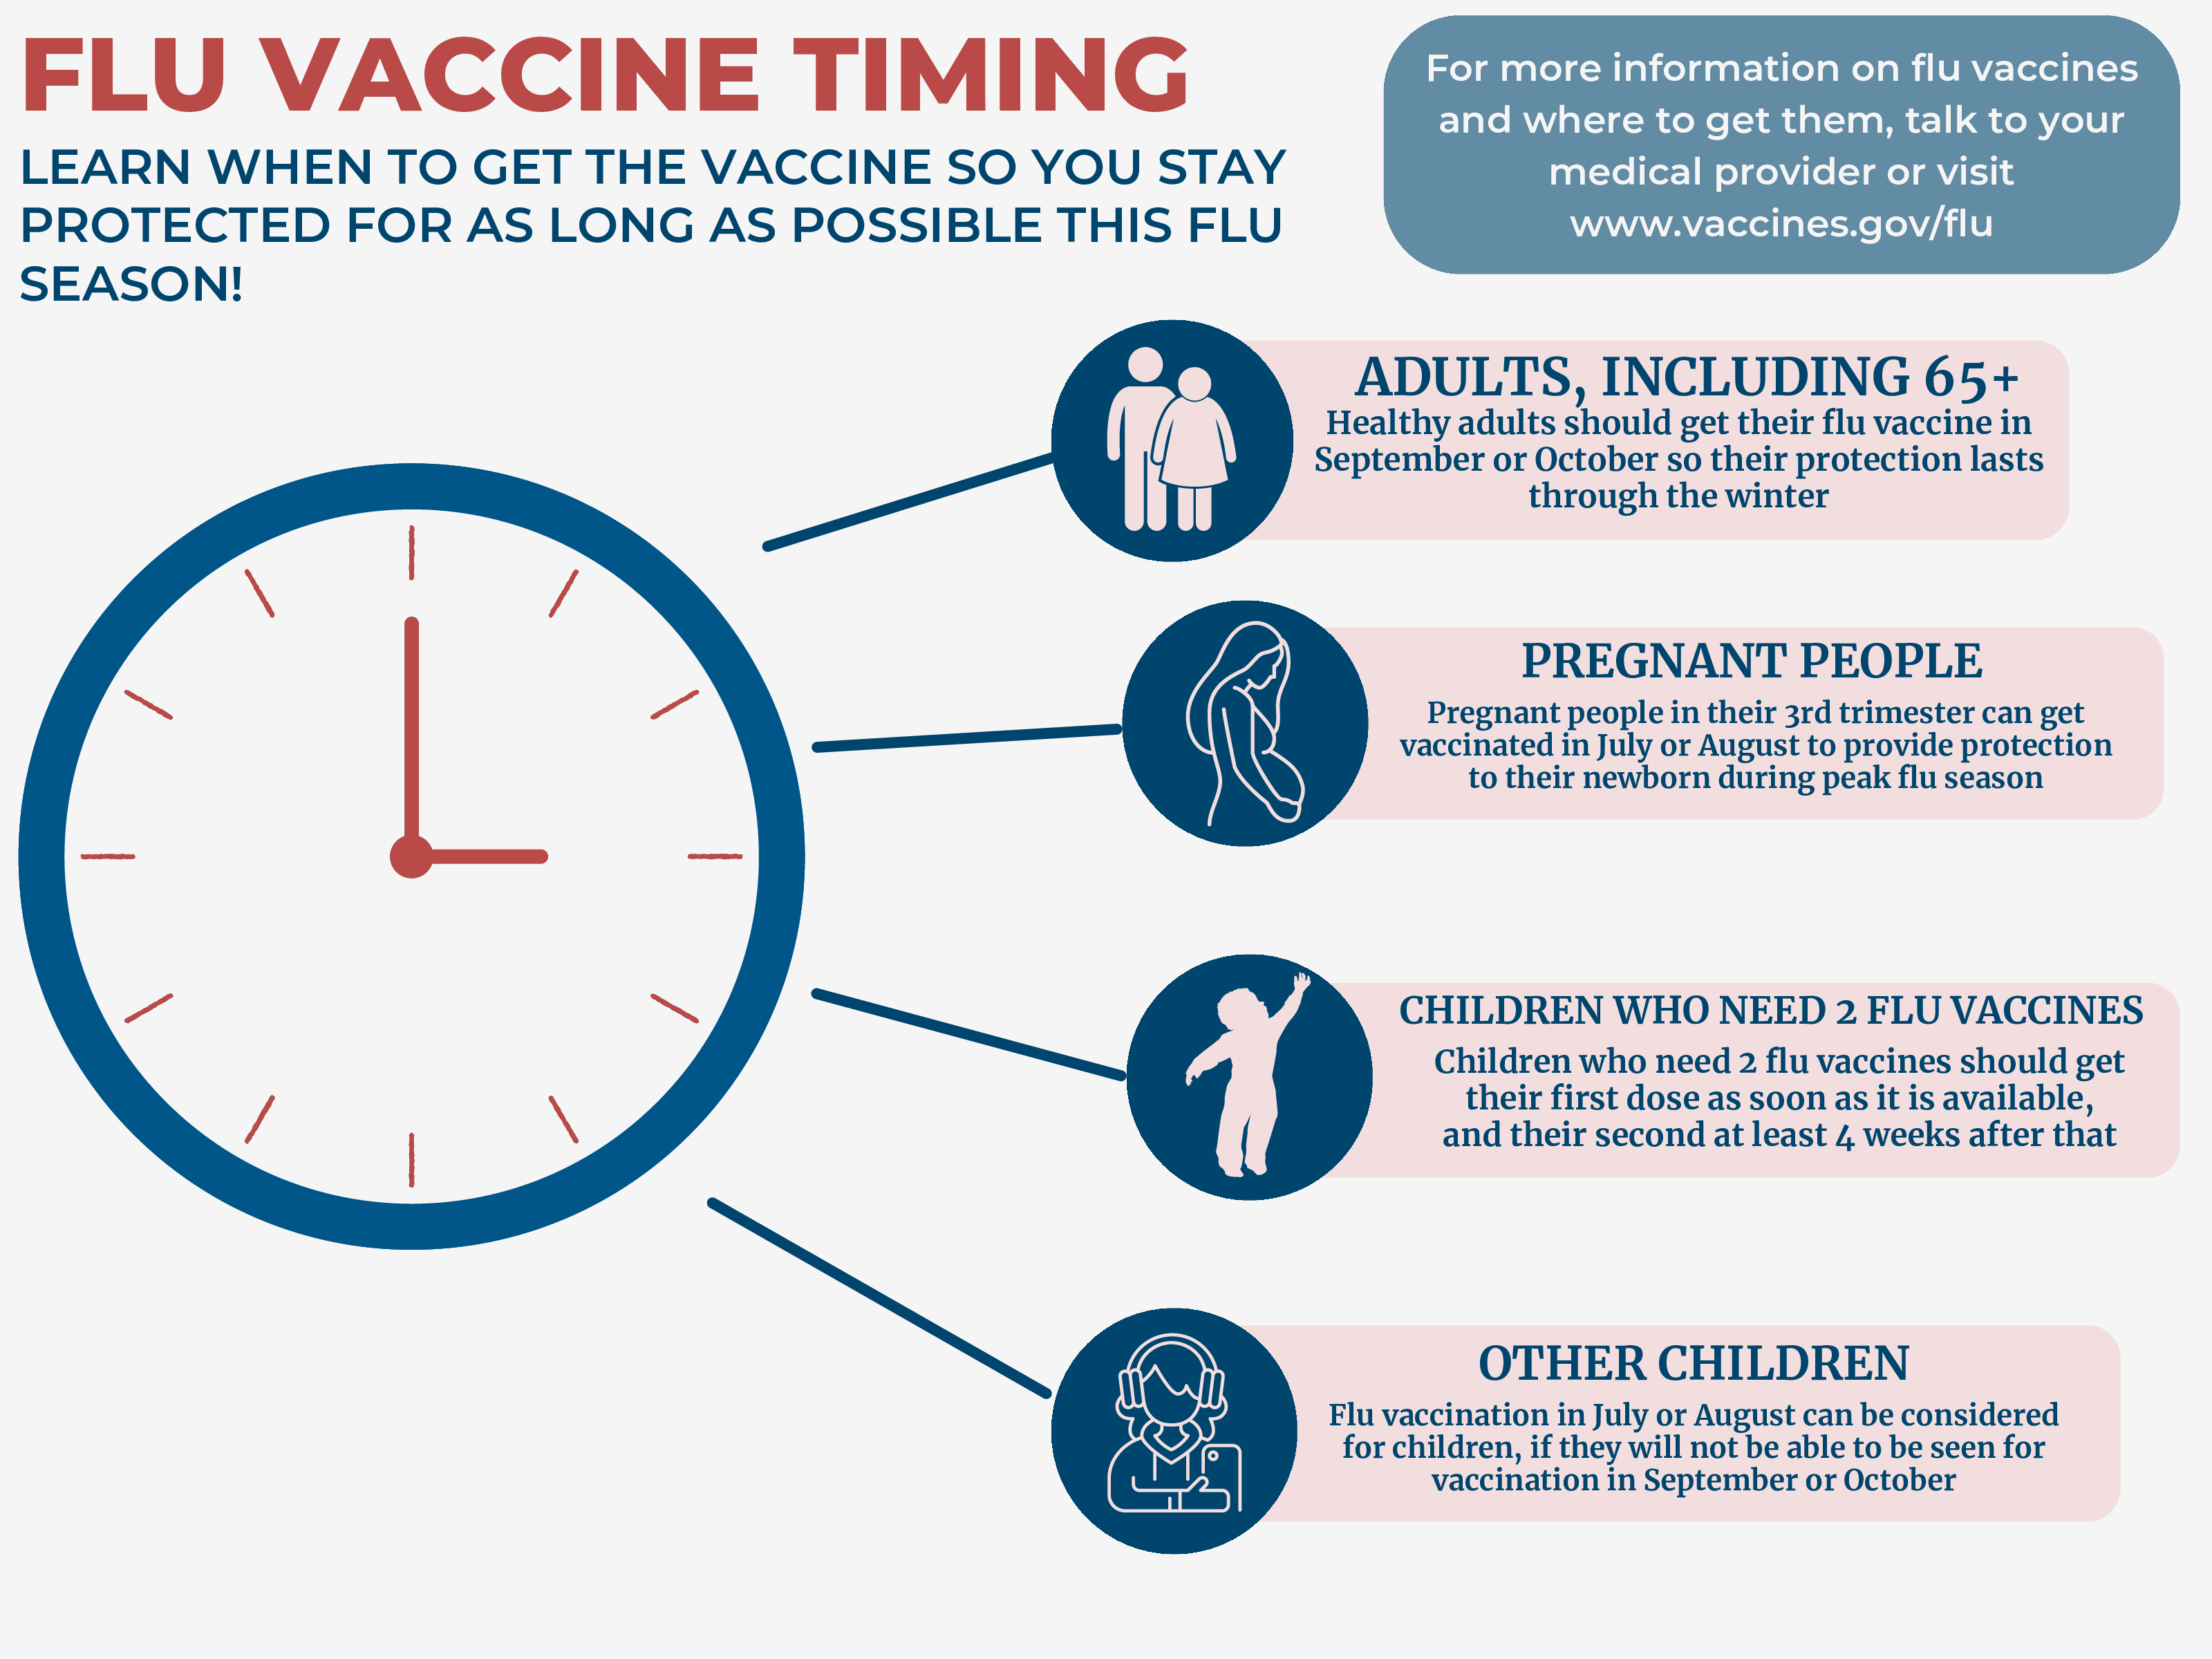 Factsheet reads 'flu vaccine timing' and has picture icons of various sub-populations: adults, pregnant people and children.